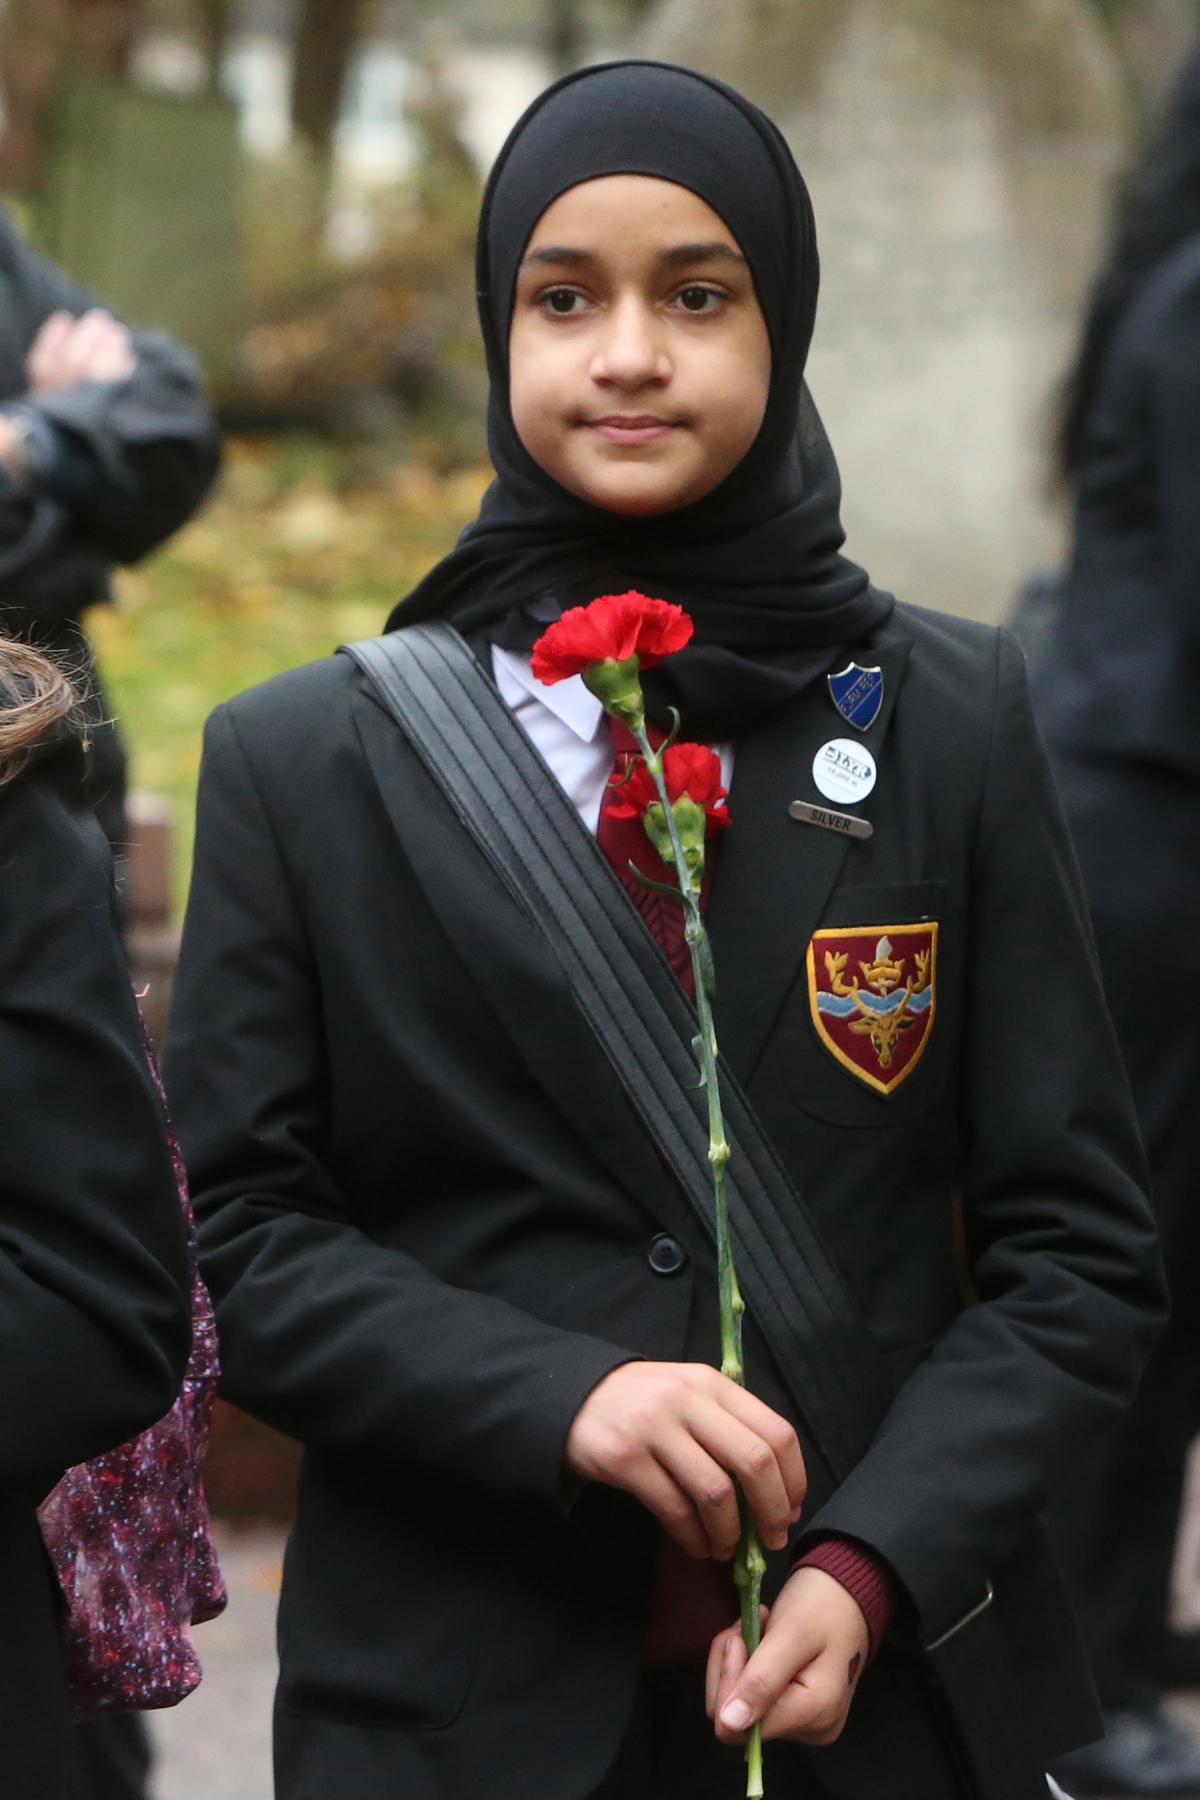 British Legion Remembrance Service at Chingford Mount Cemetery, children from Chingford Foundation, Parkside, Rushcroft and Chace Community from Enfield placed flowers over 200 graves. (6/11/2015) EL86105_5